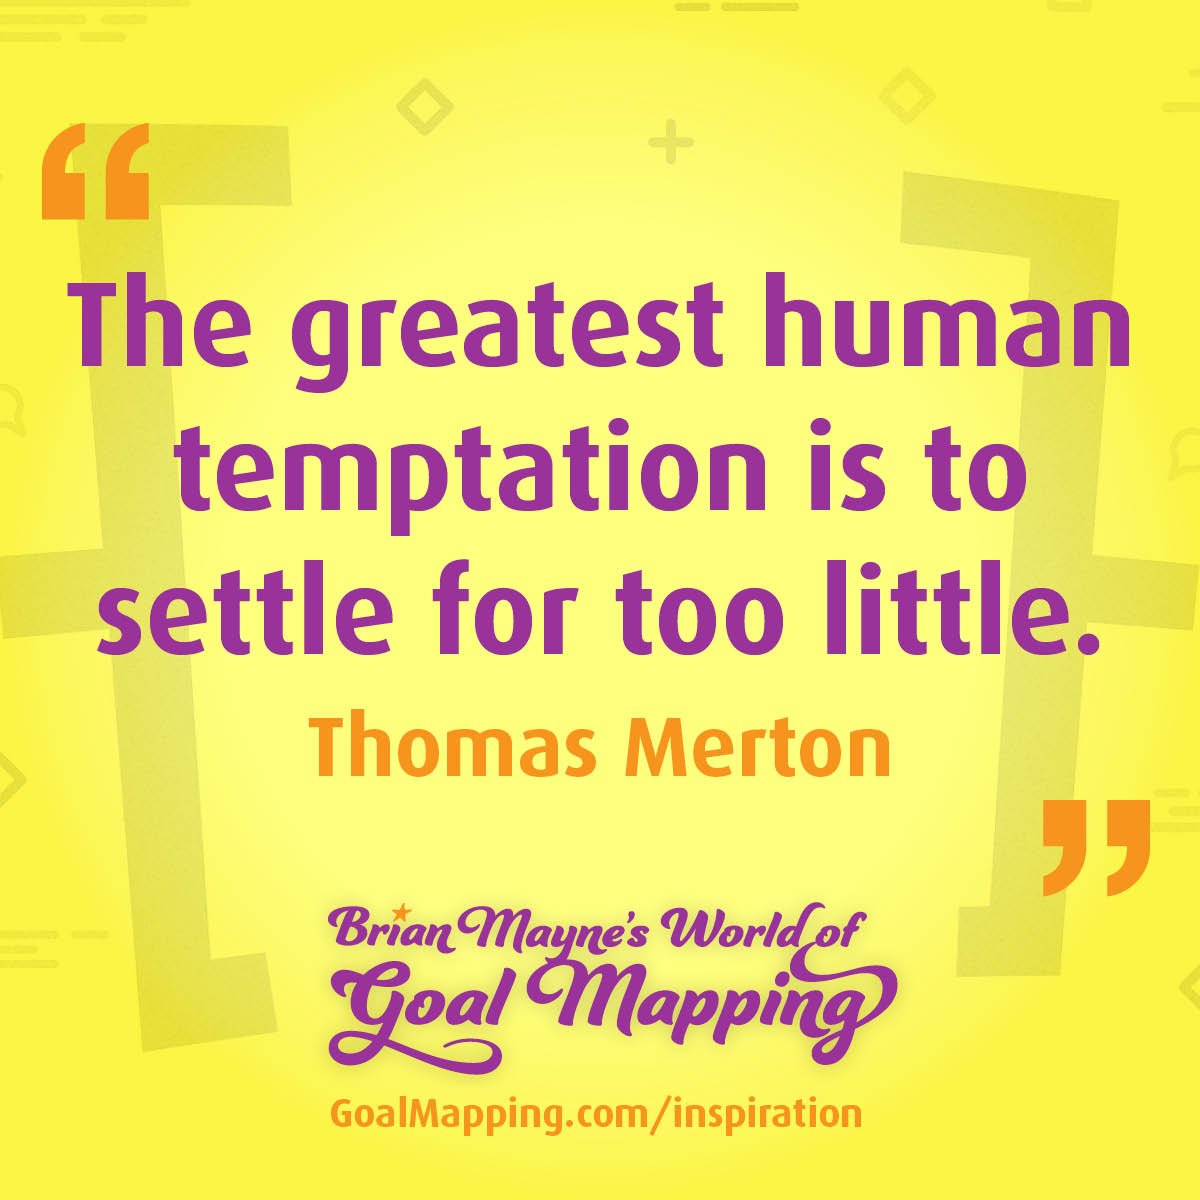 "The greatest human temptation is to settle for too little." Thomas Merton